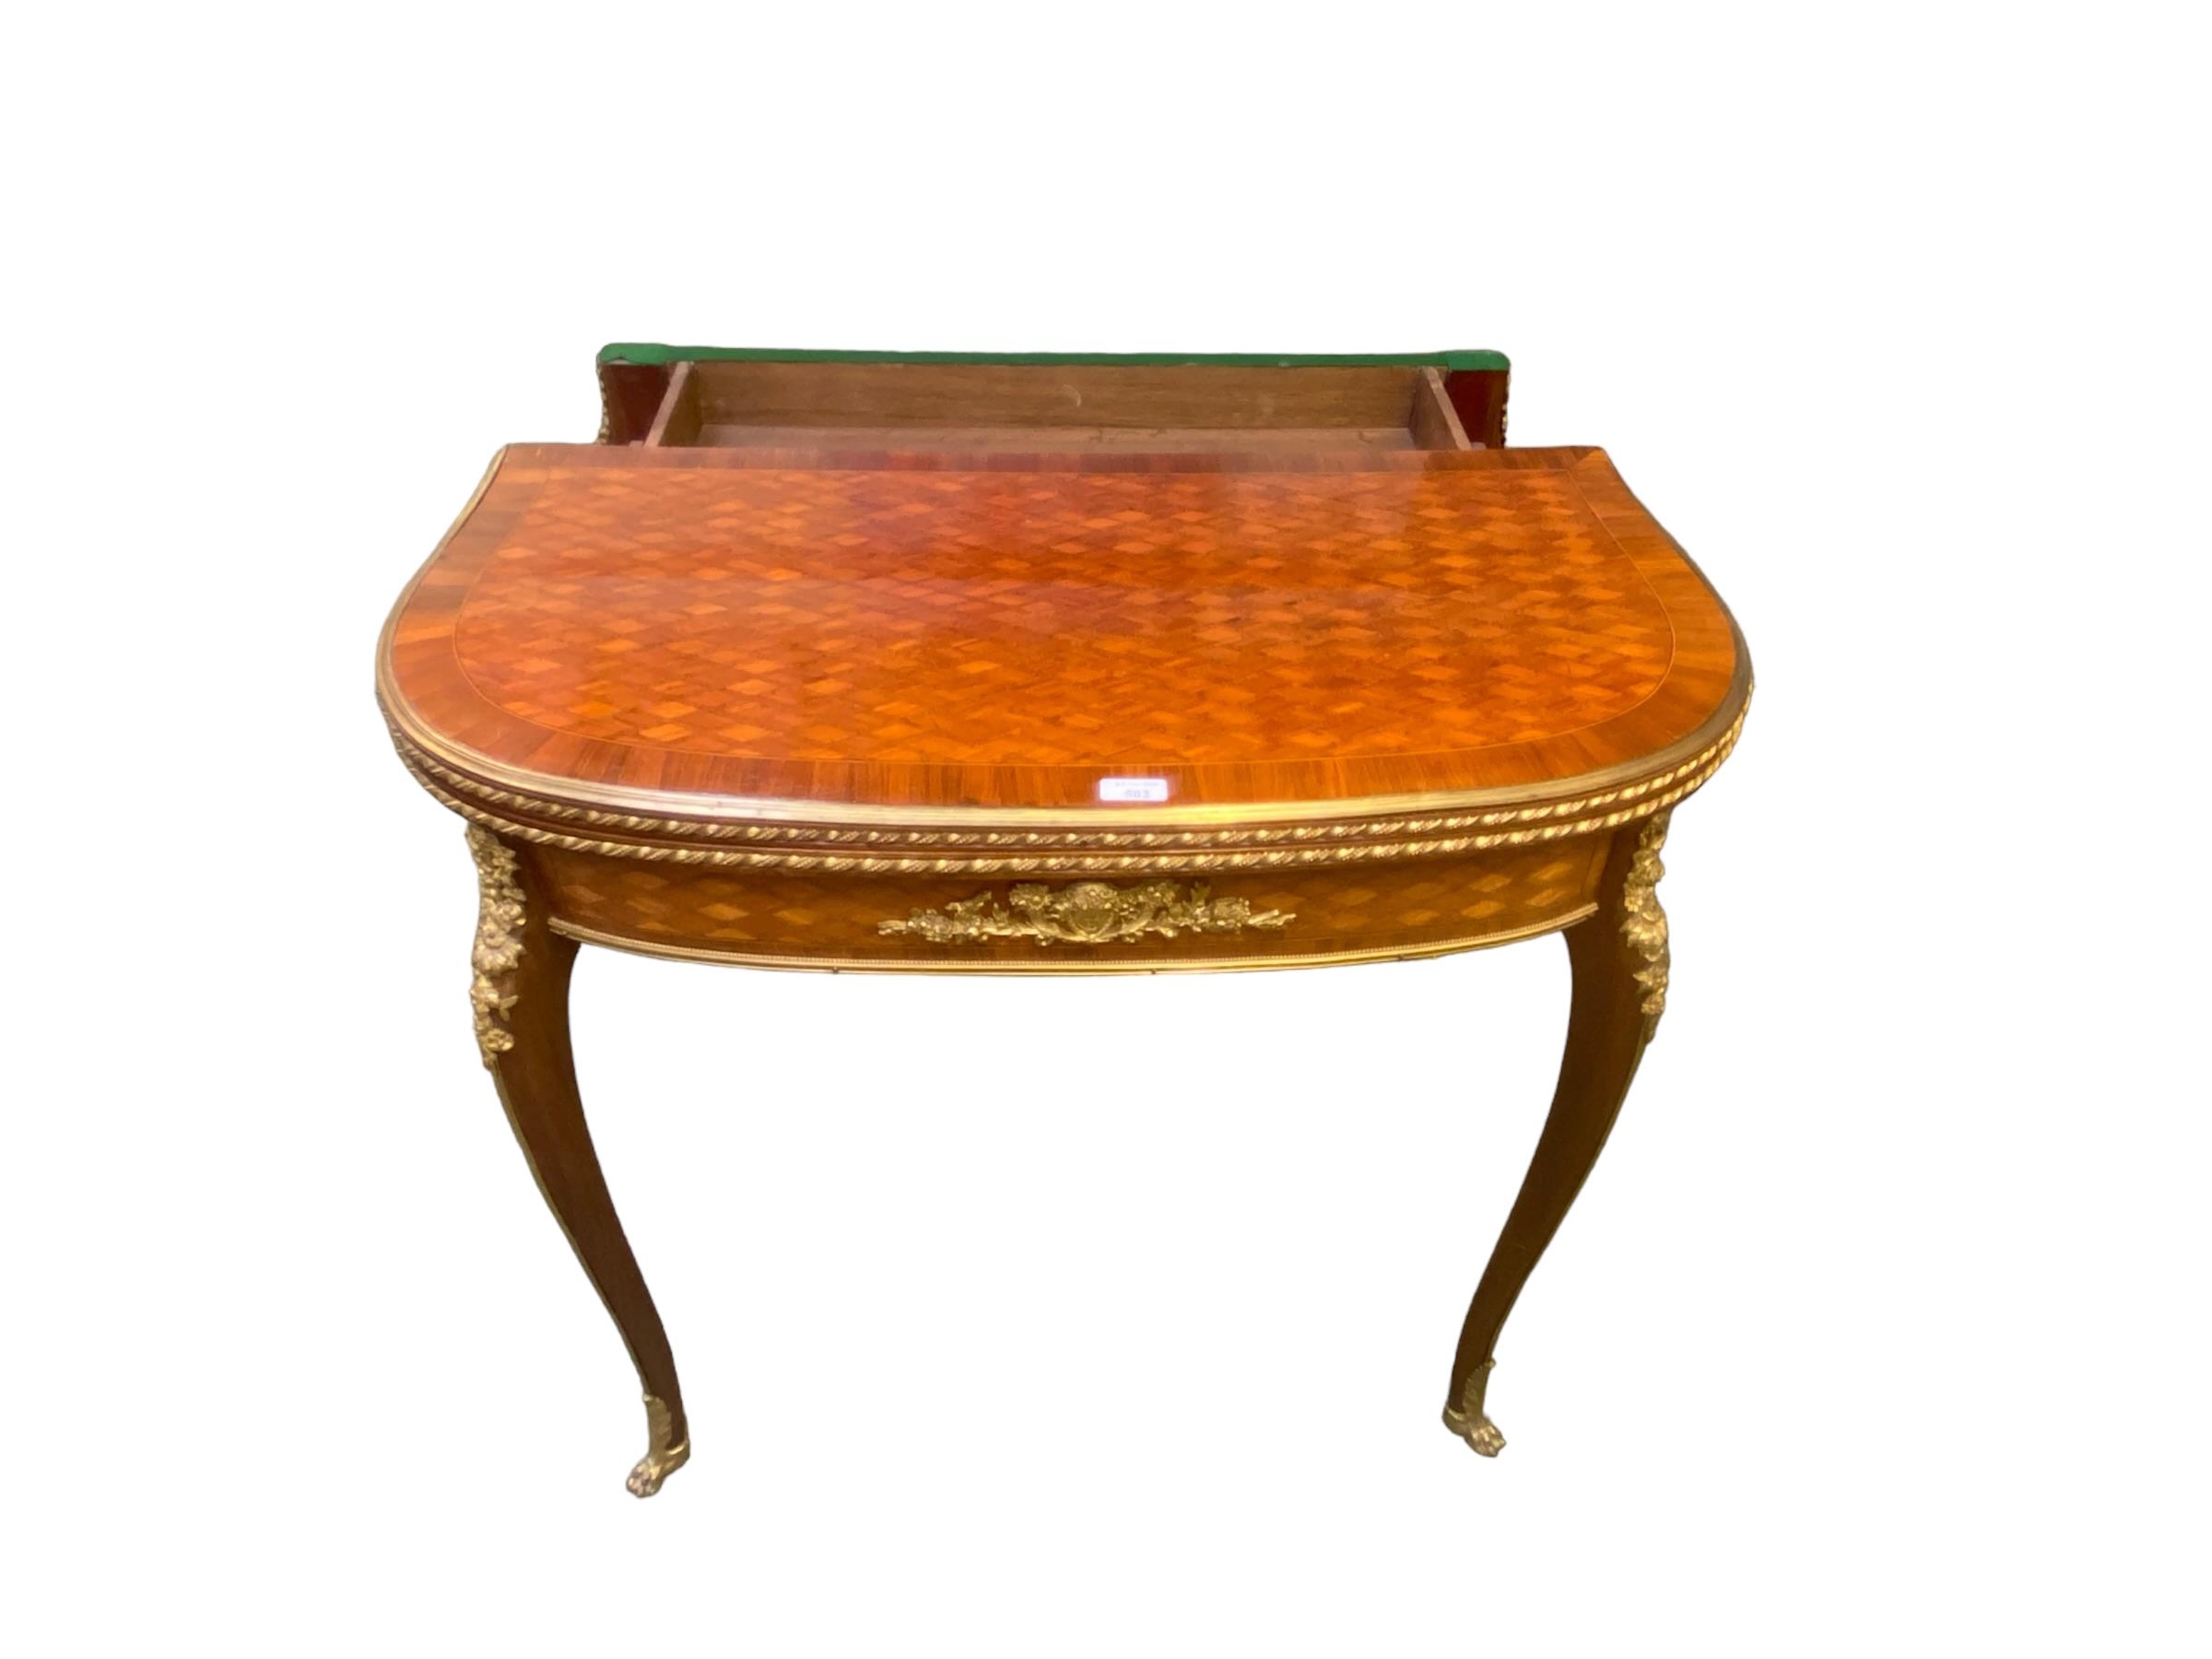 Louis XVI style kingwood ormulu mounted flip top card table, with single recessed drawer 84 cm W x - Image 2 of 3